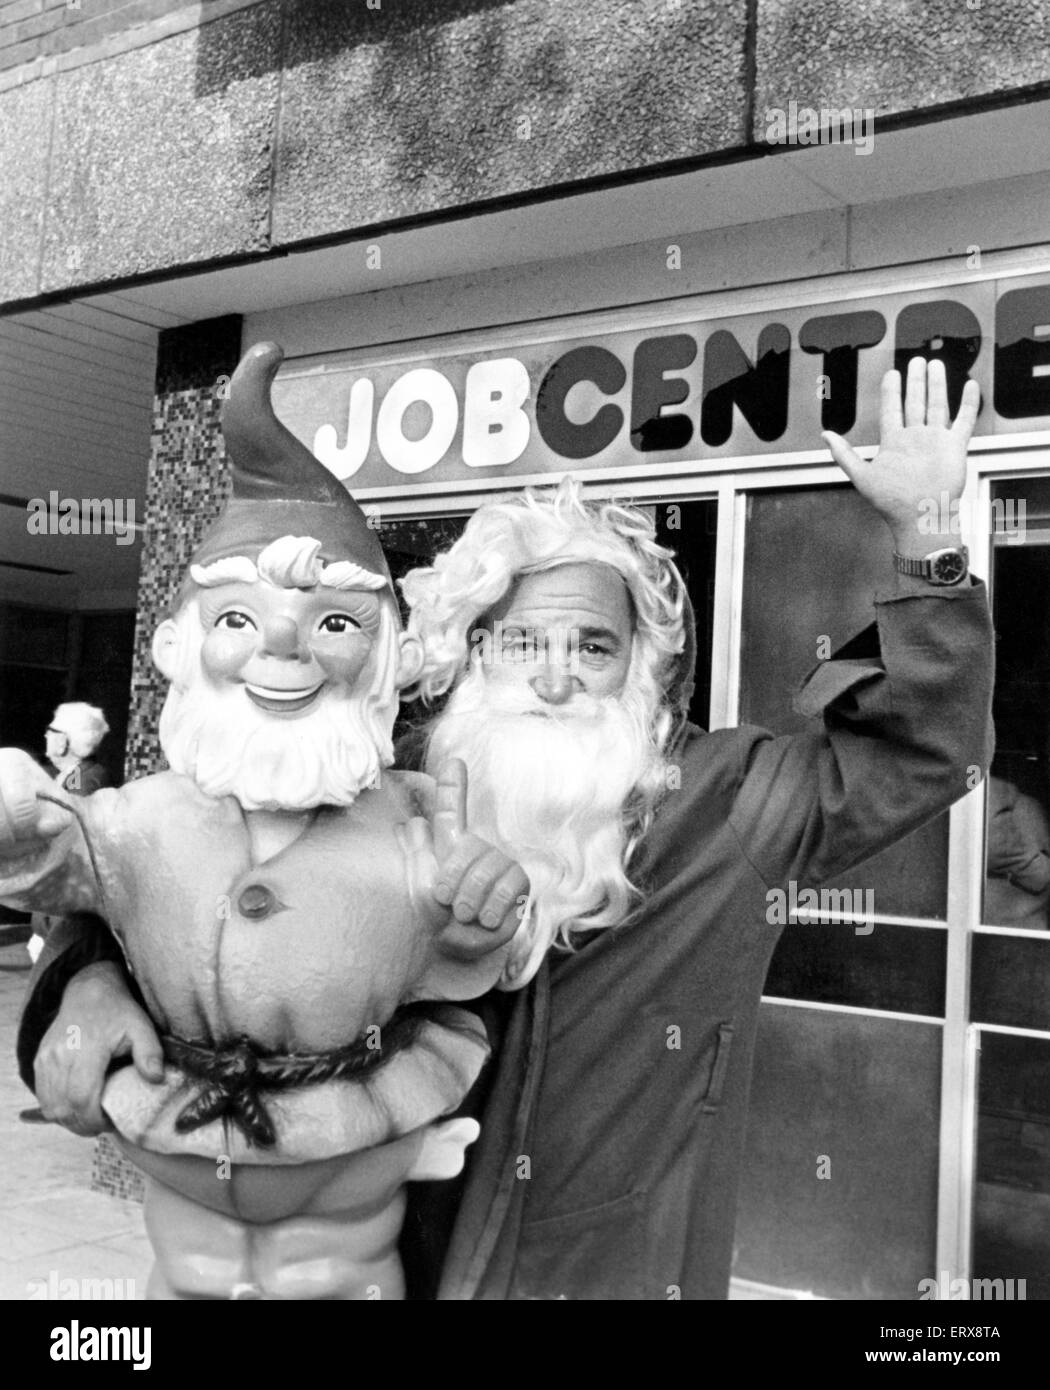 Jolly job hunter Ken Ellis found an early Christmas present waiting for him in the Situations Vacant column, he is going to be a Stockton store's Santa claus, 26th October 1982. Stock Photo